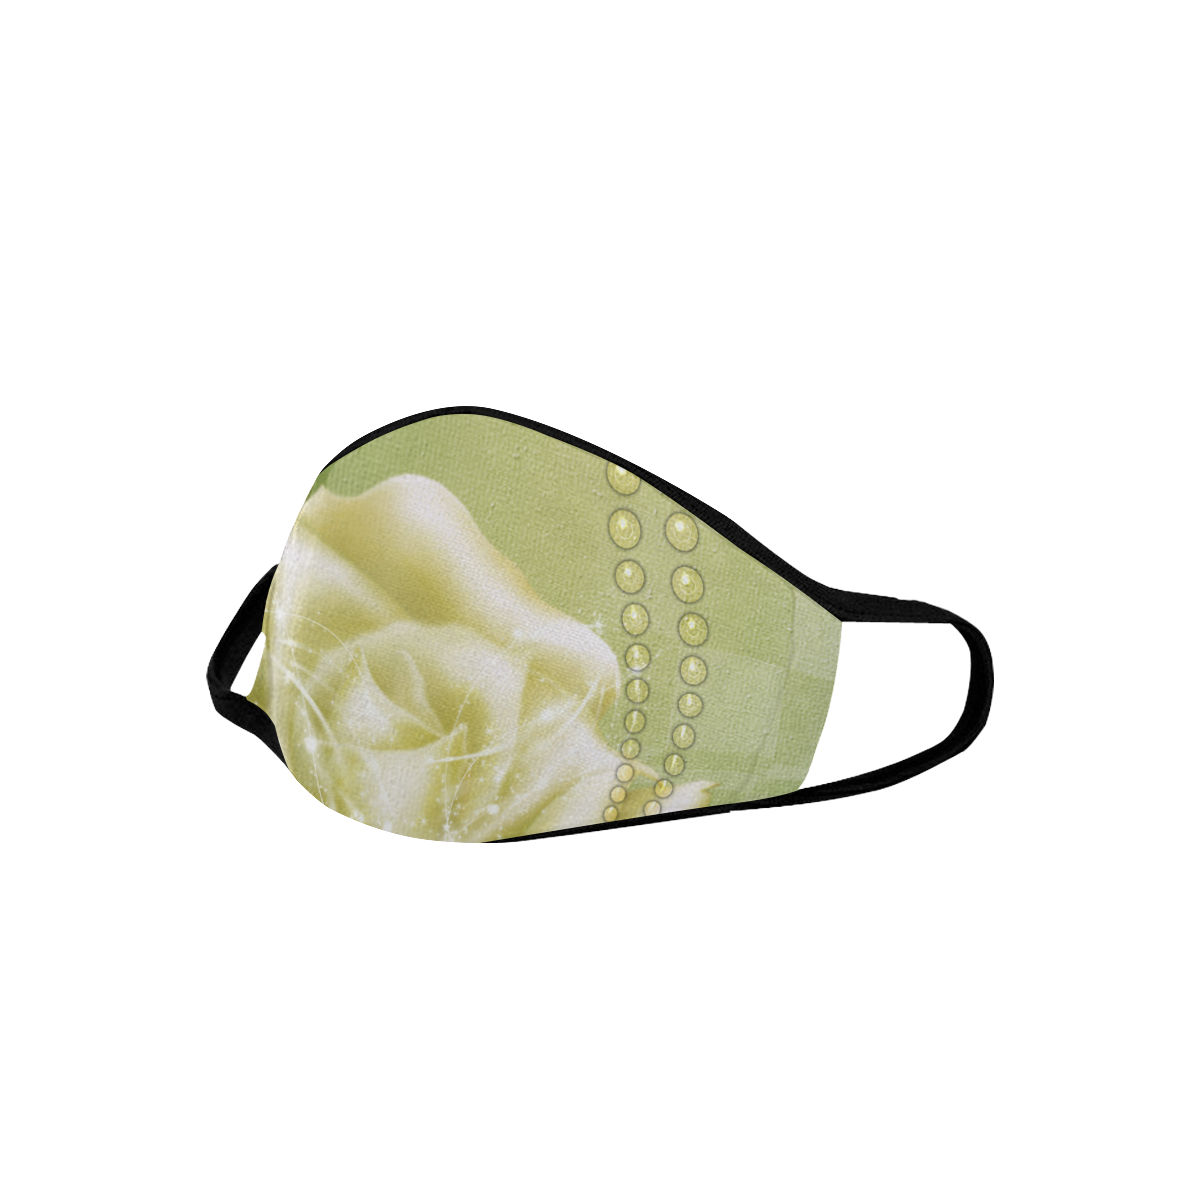 Beautiful soft green roses Mouth Mask (60 Filters Included) (Non-medical Products)